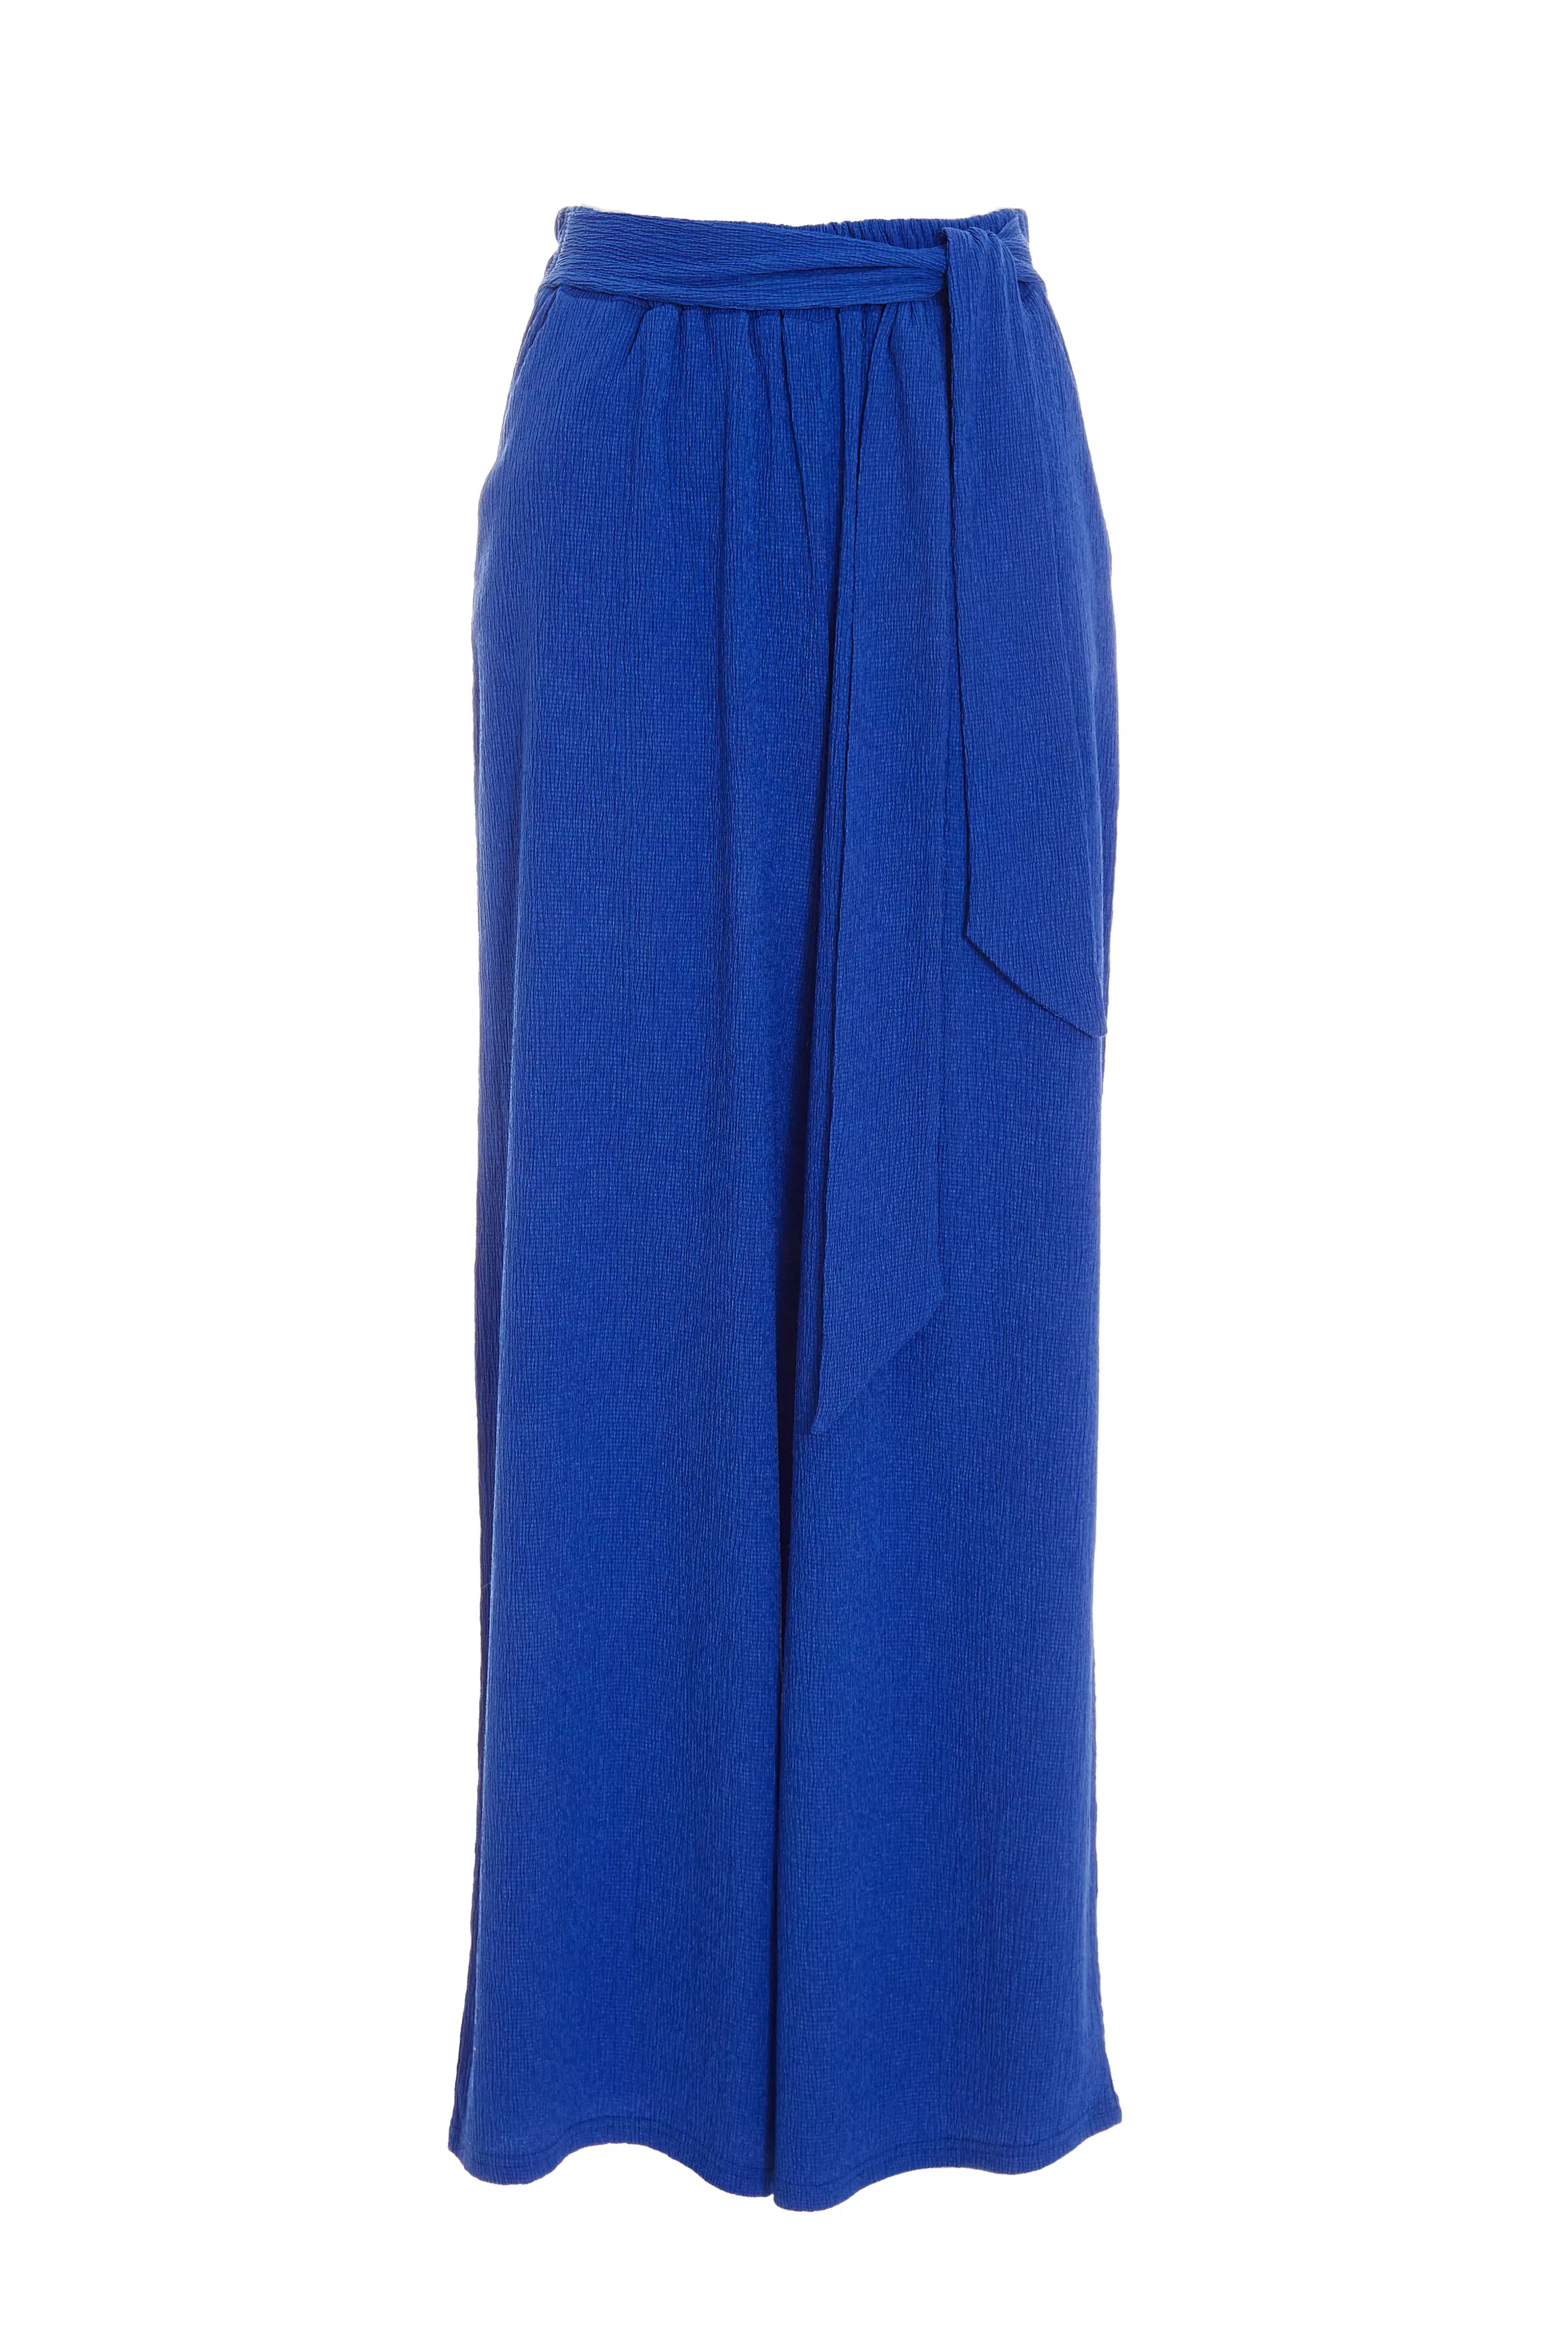 Royal Blue Crinkle Wide Leg Trousers - QUIZ Clothing